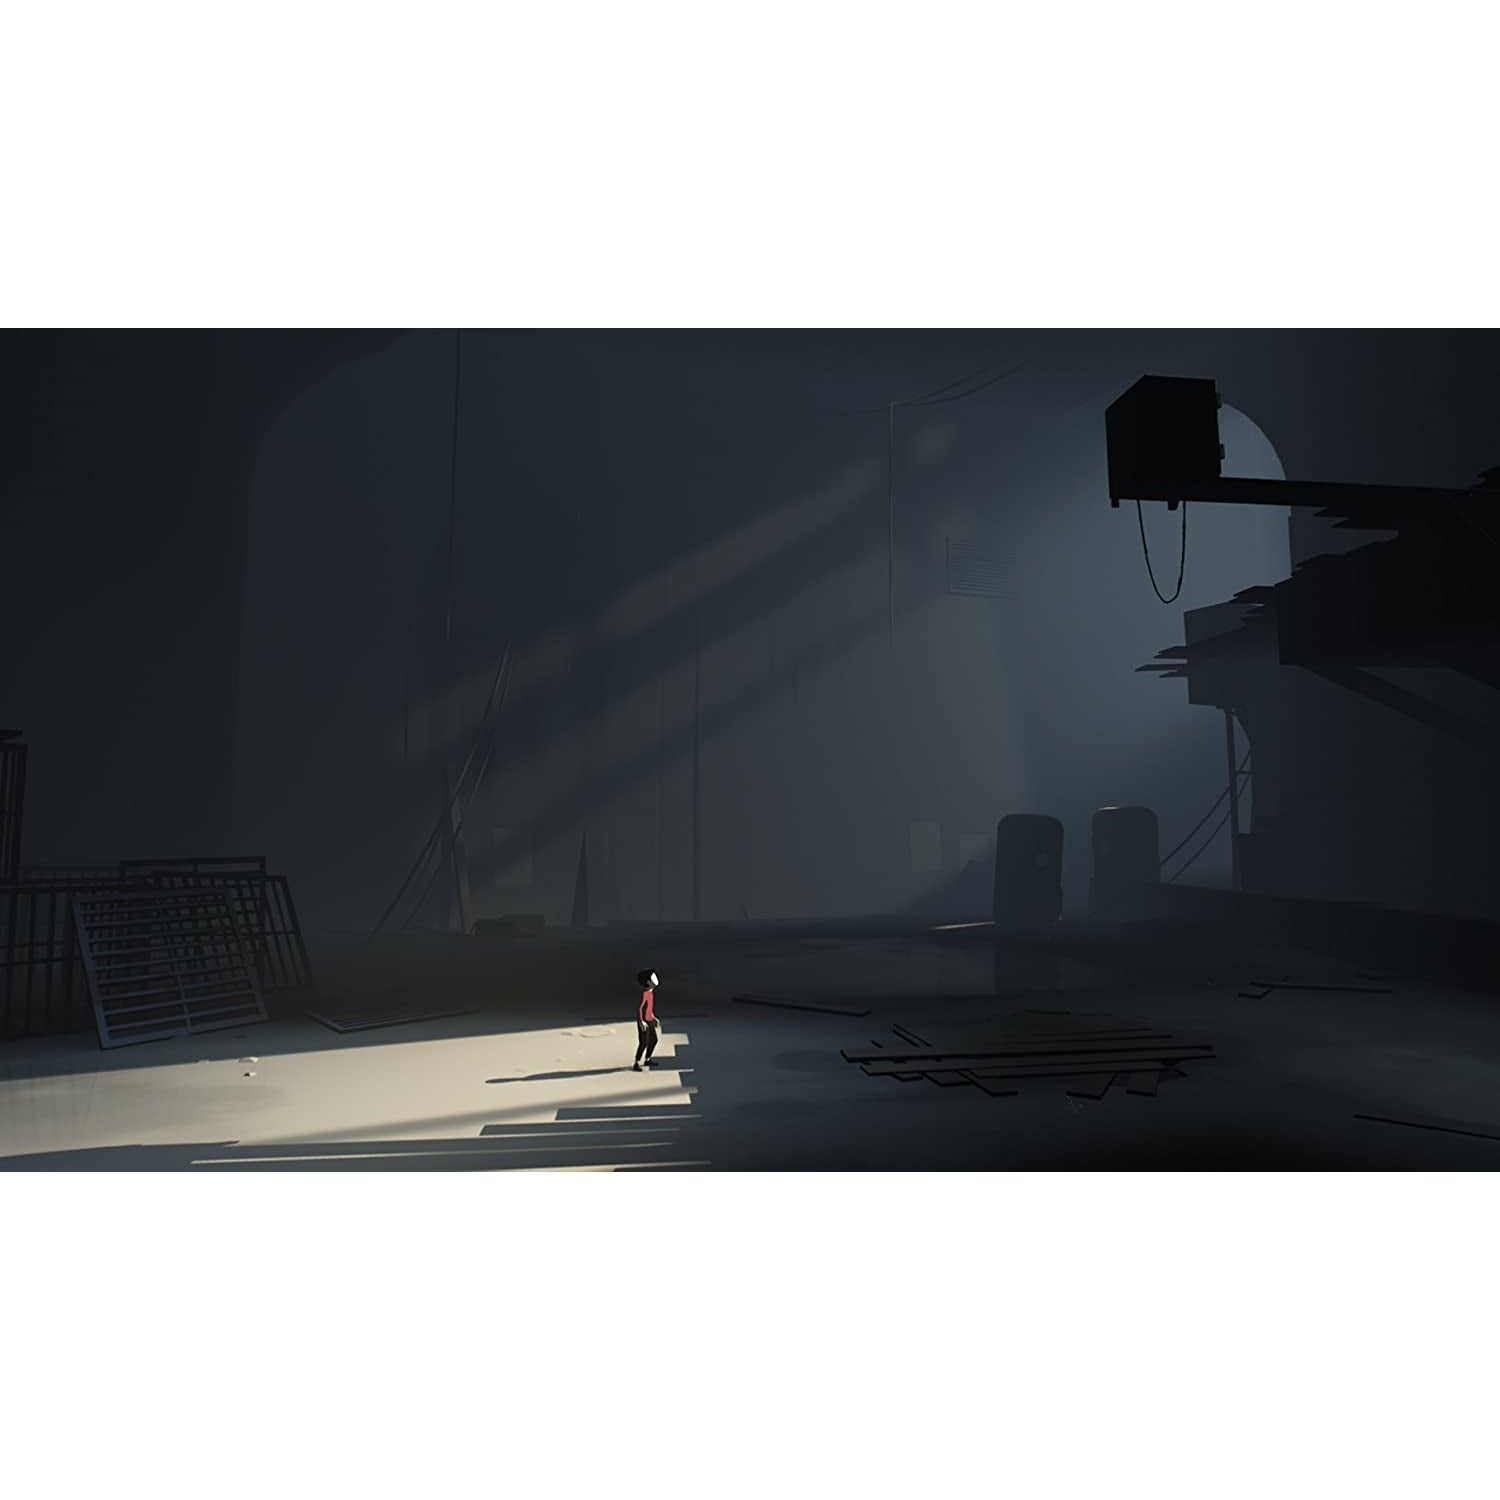 Inside-Limbo Double Pack (PS4)